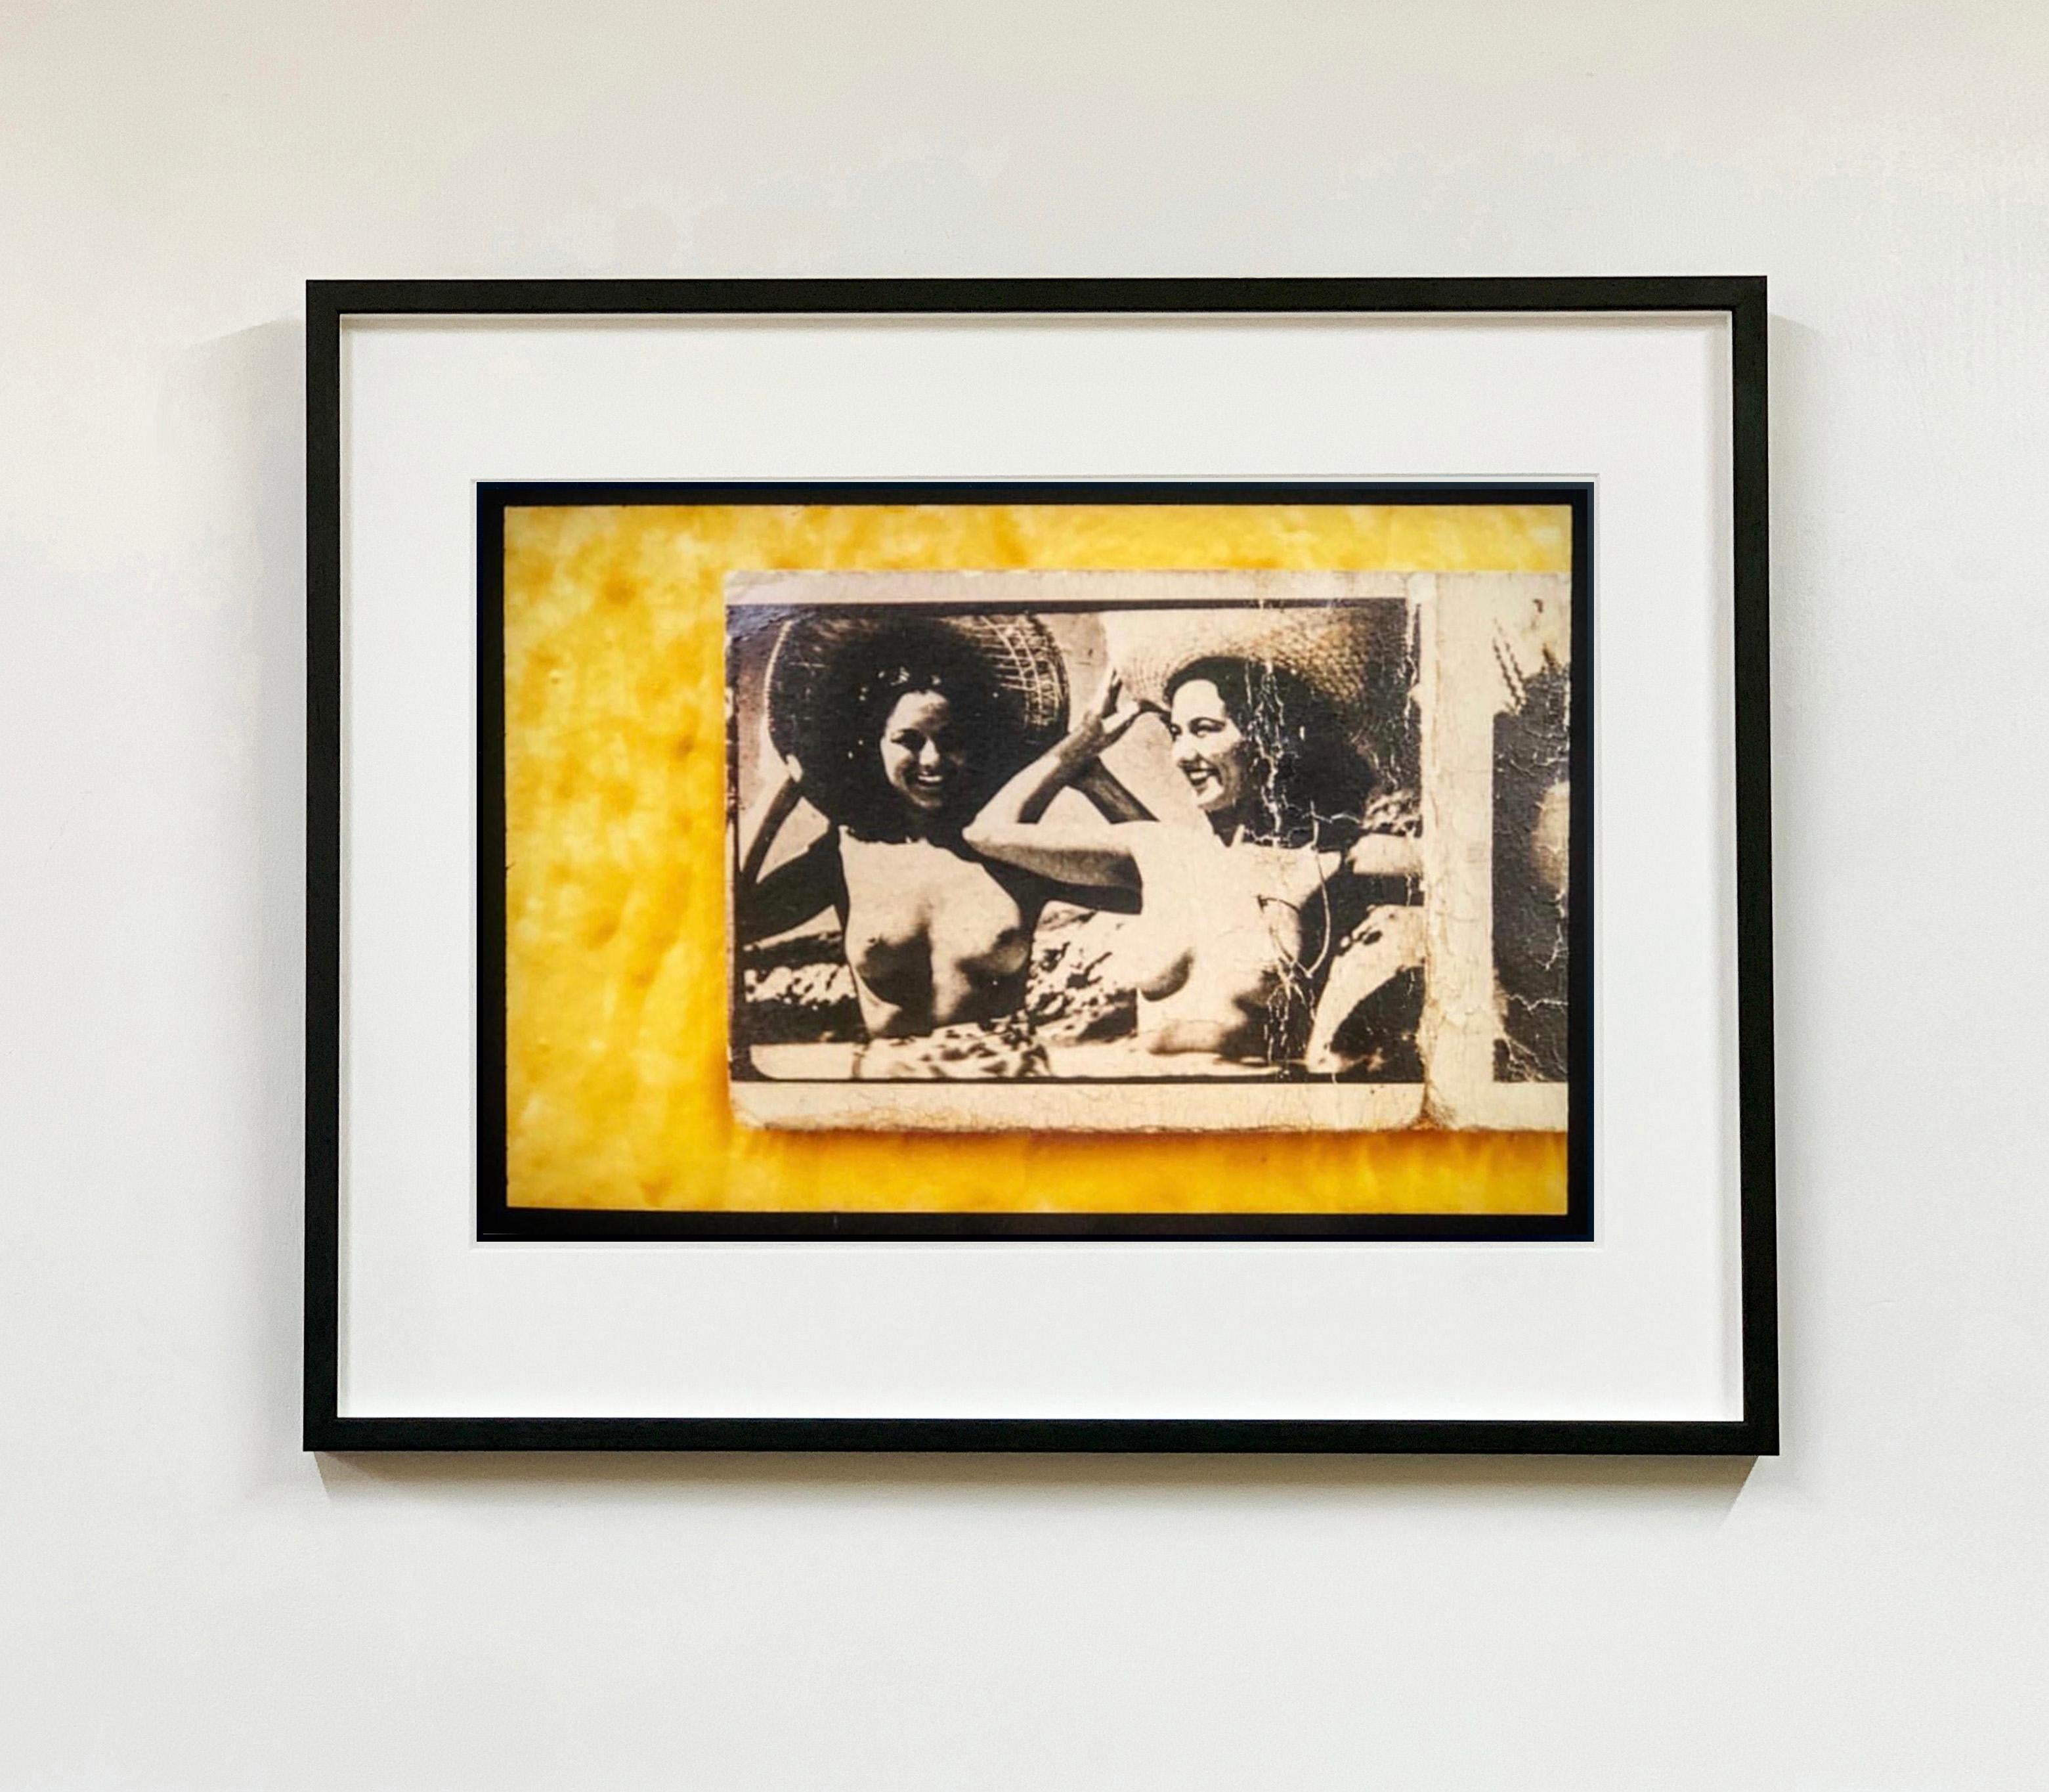 Jersey Girls Yellow, photograph from Richard Heeps Jersey Shore series.
Vintage matchbooks from New York's Chelsea Flea Market featuring nudes from the 1940's are reimagined by Richard Heeps in this colour photoshoot.

This artwork is a limited